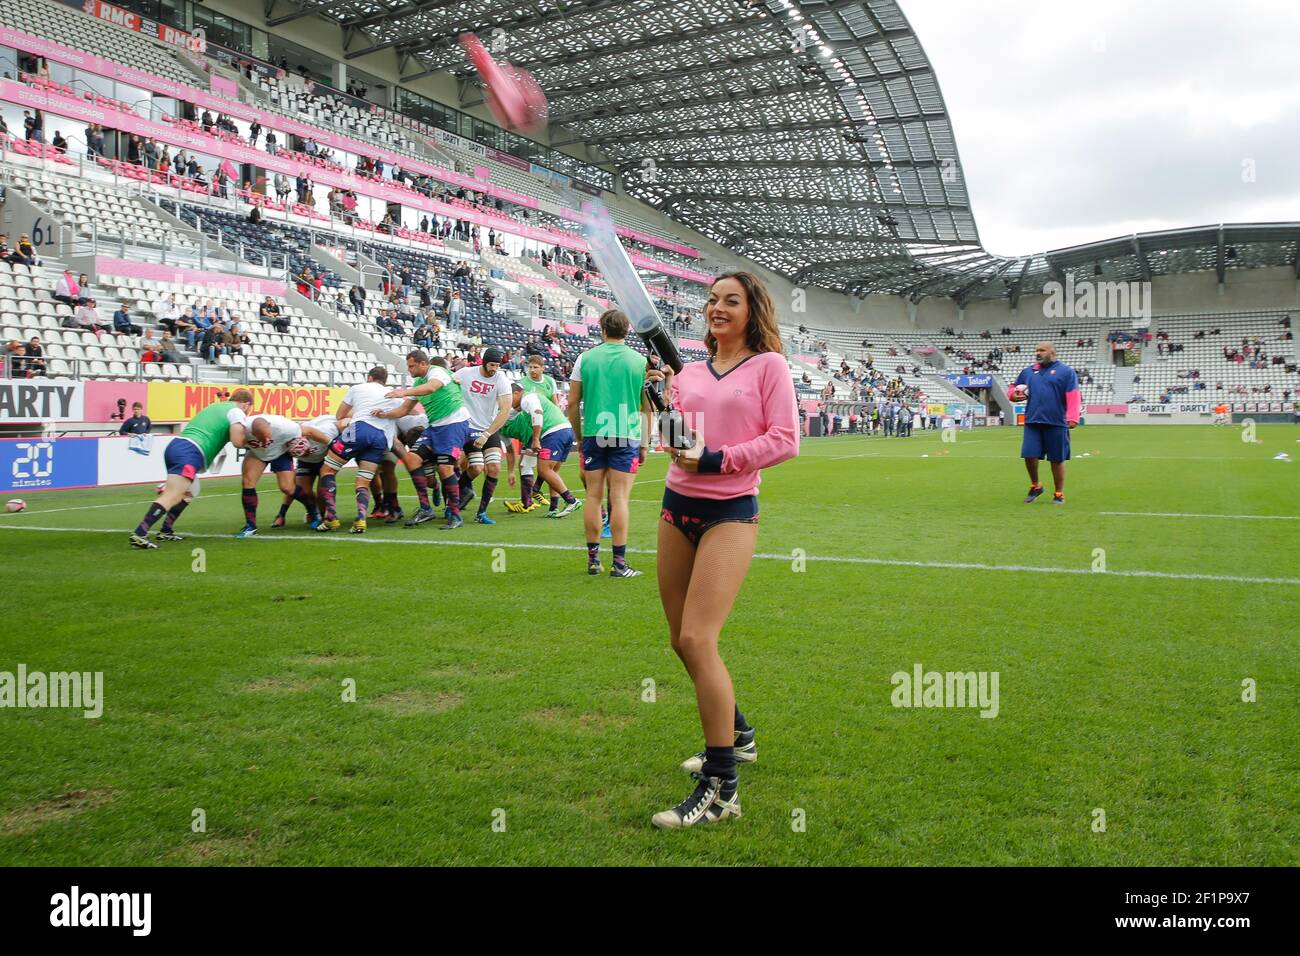 Cheerleaders during the French championship Top 14 Rugby Union match  between Stade Francais Paris and Stade